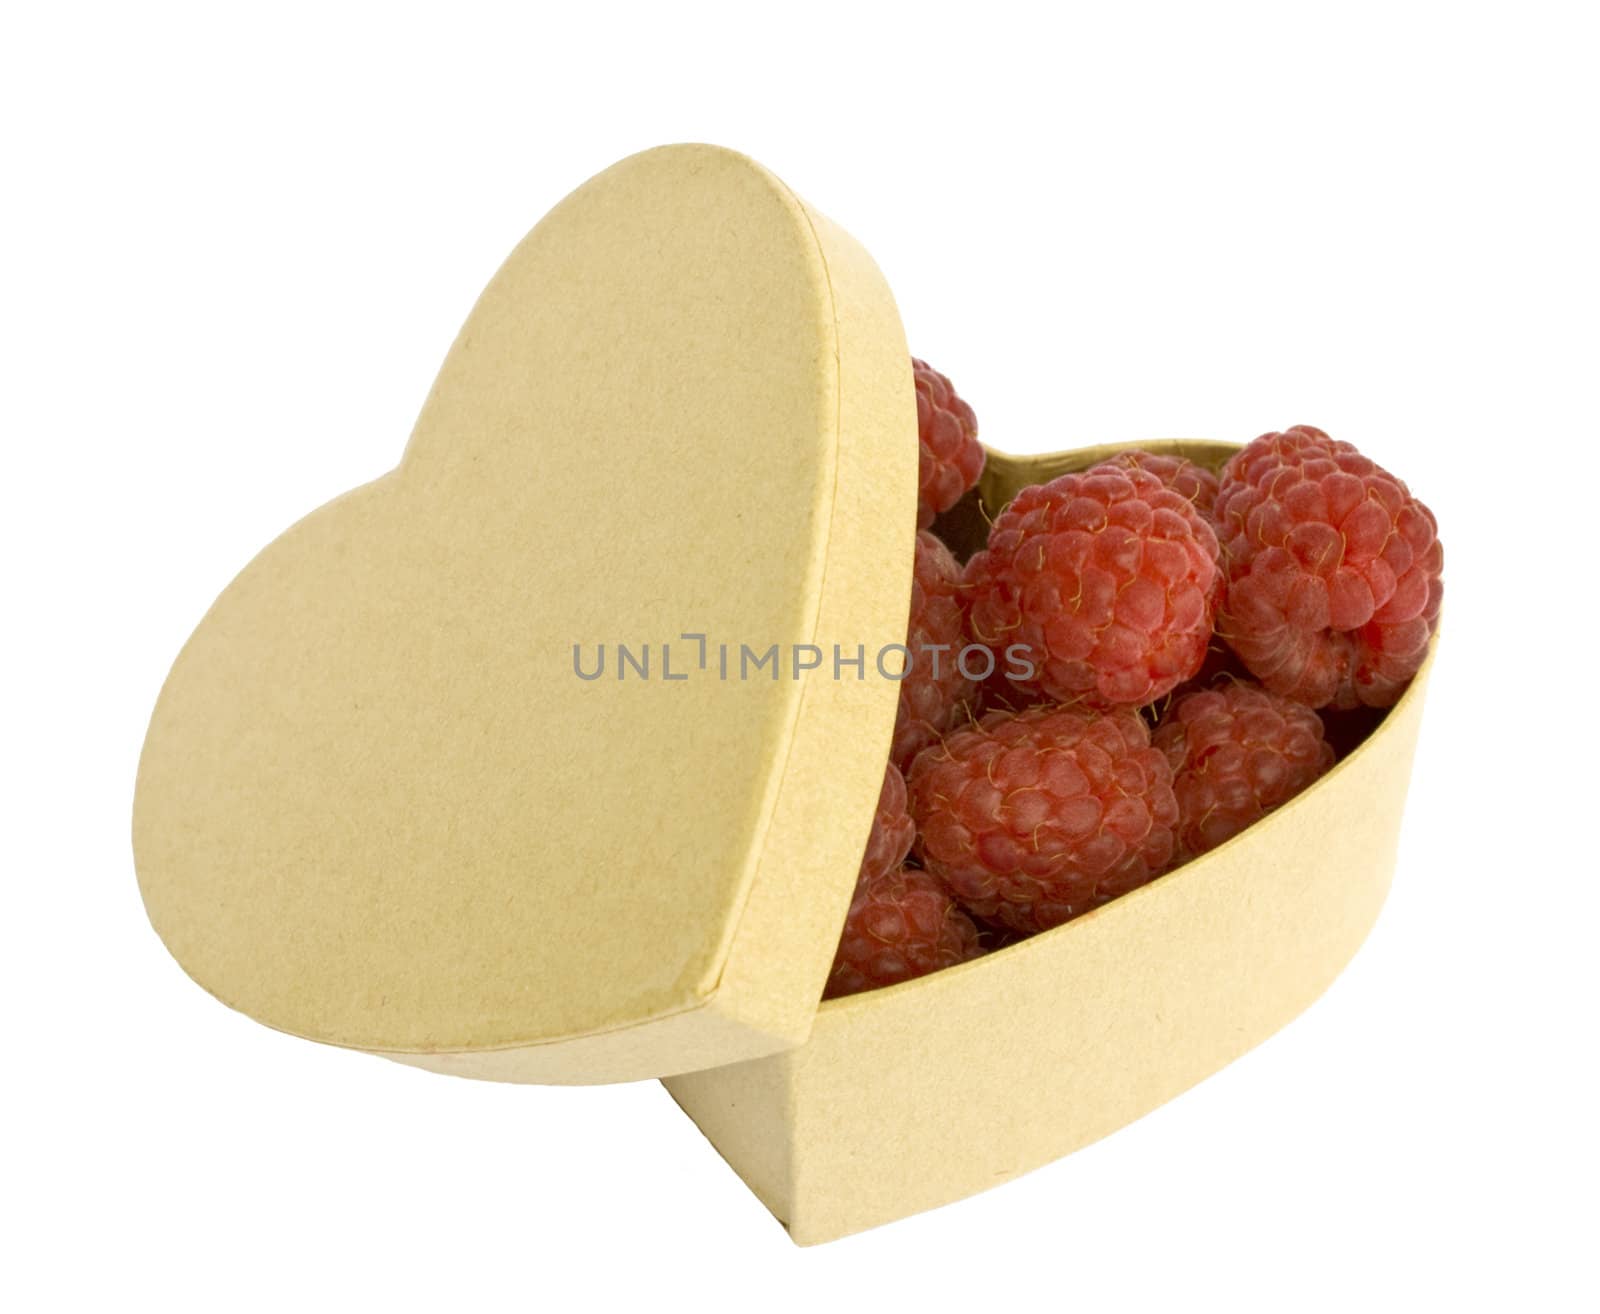 Raspberries in a heart shaped box, isolated on white background.